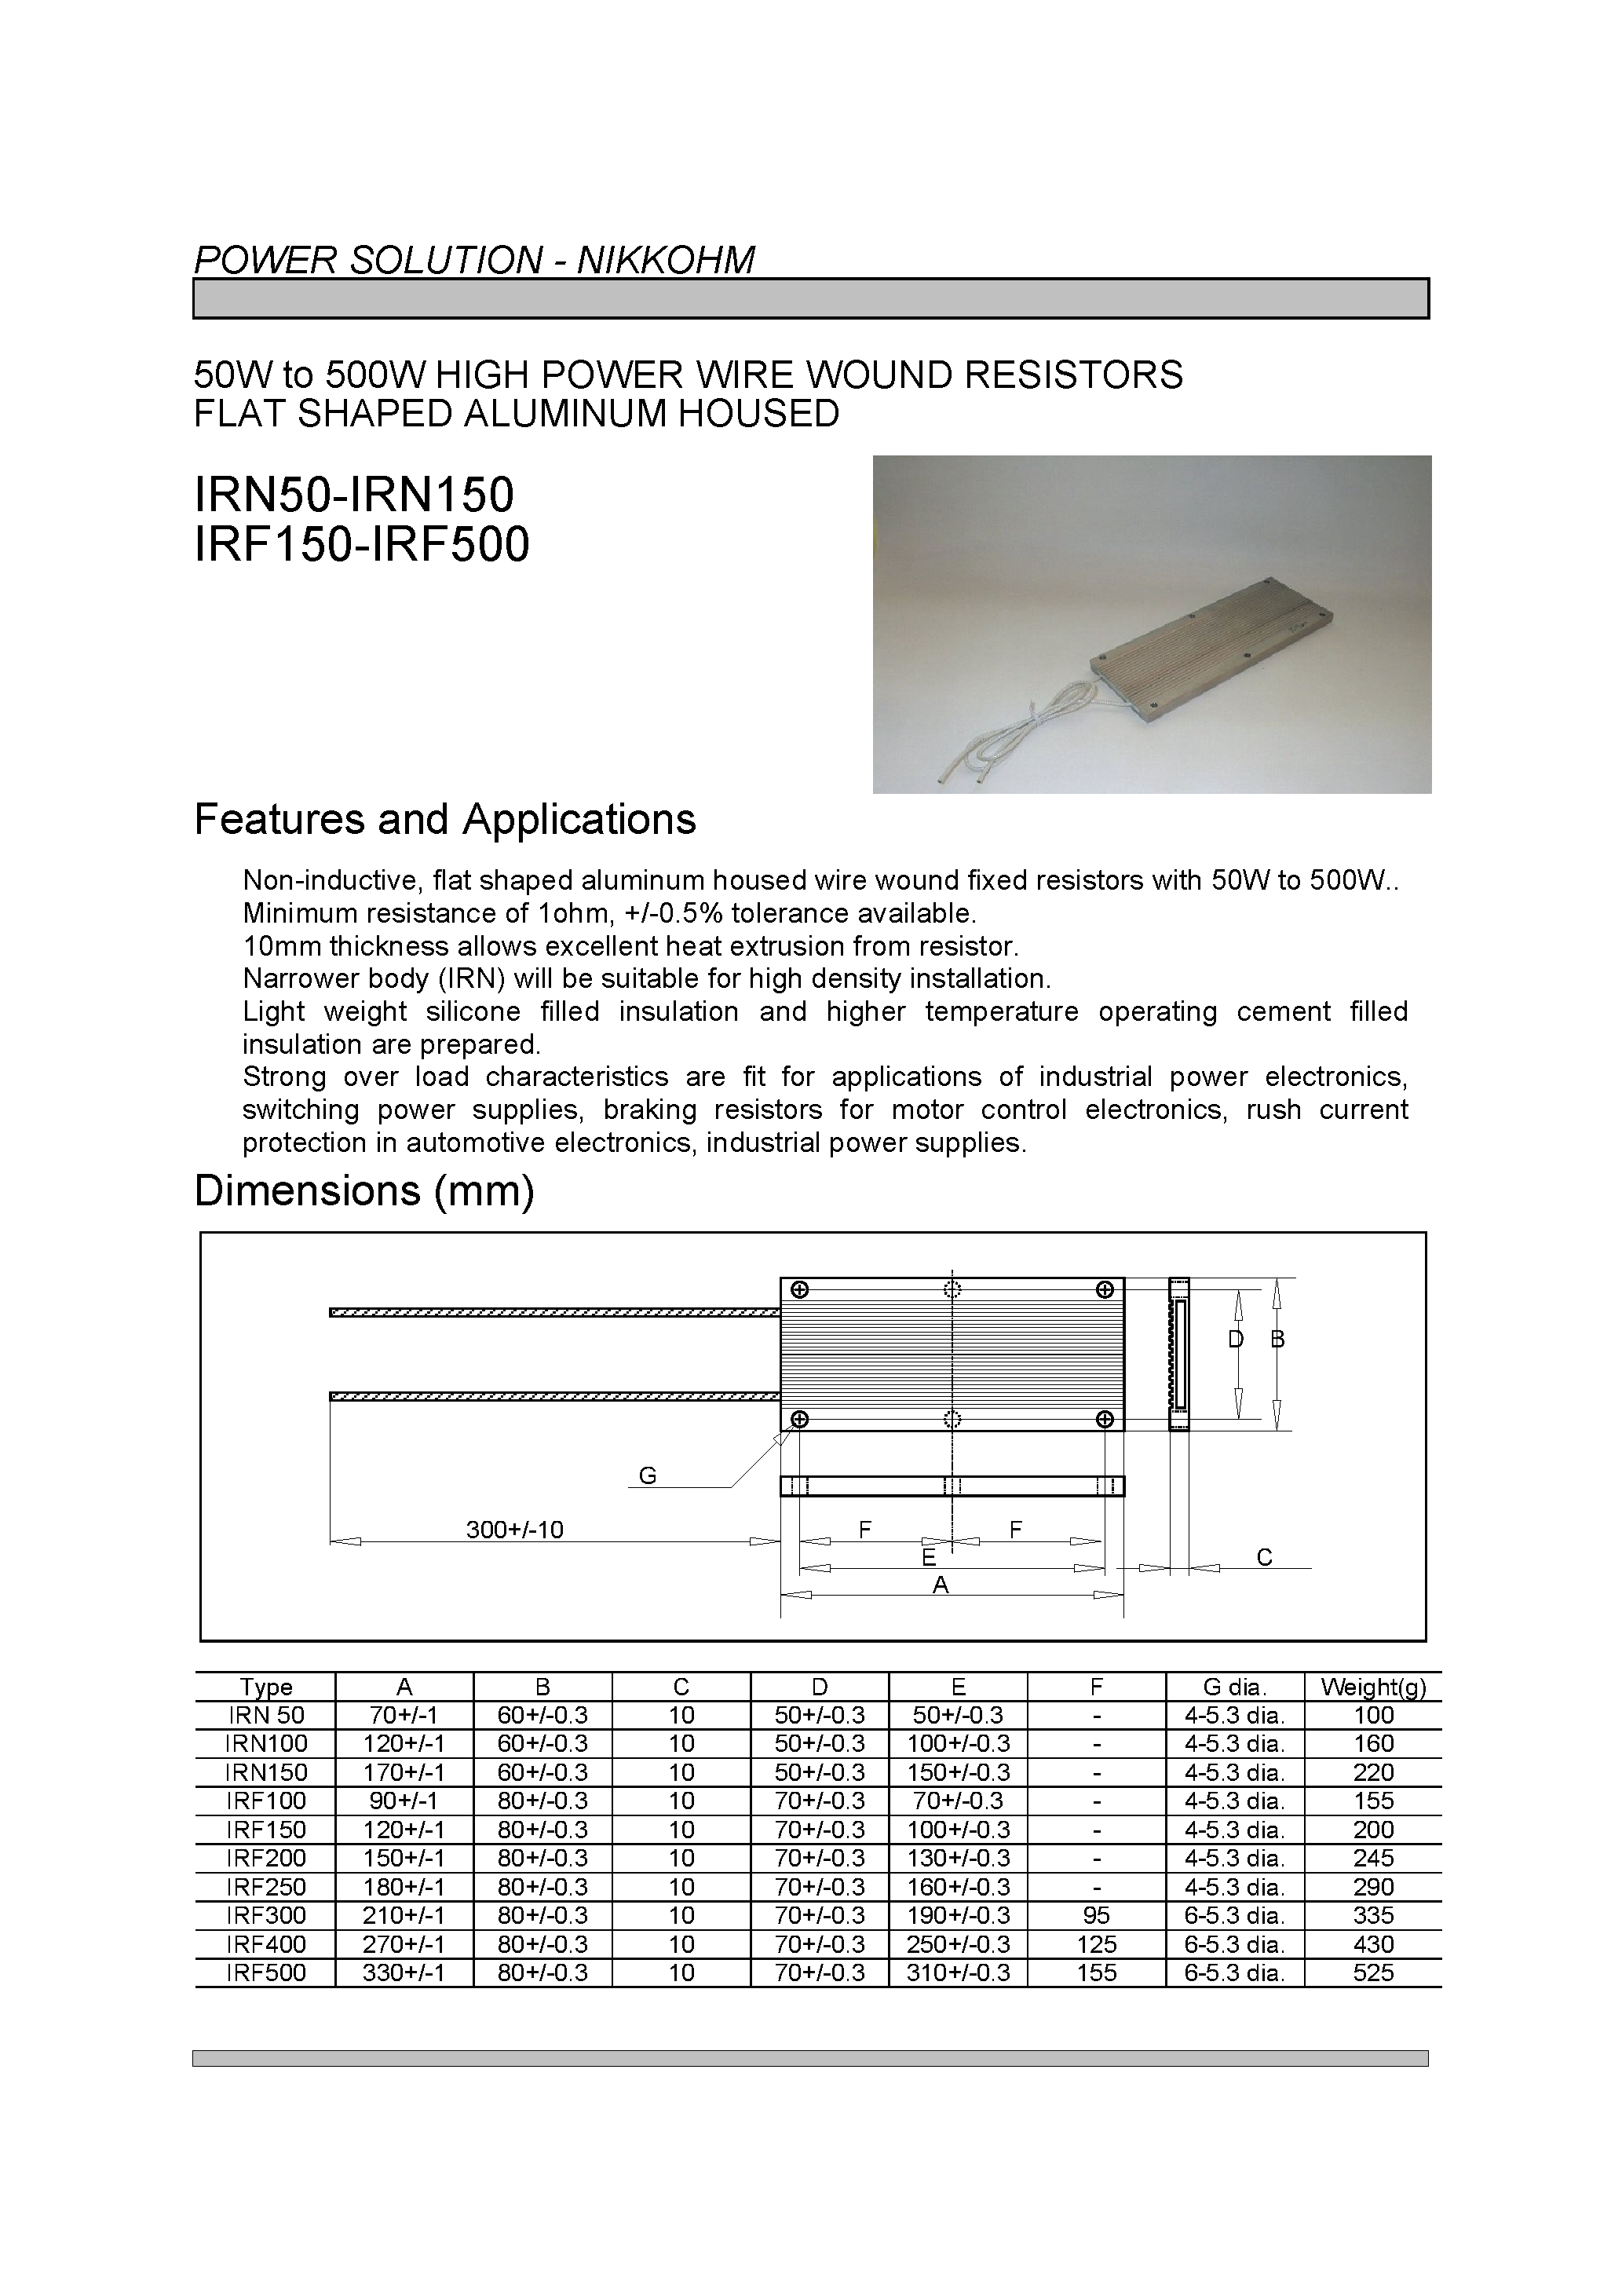 Даташит IRF100-(IRF150 - IRF500) 50W to 500W HIGH POWER WIRE WOUND RESISTORS FLAT SHAPED ALUMINUM HOUSED страница 1